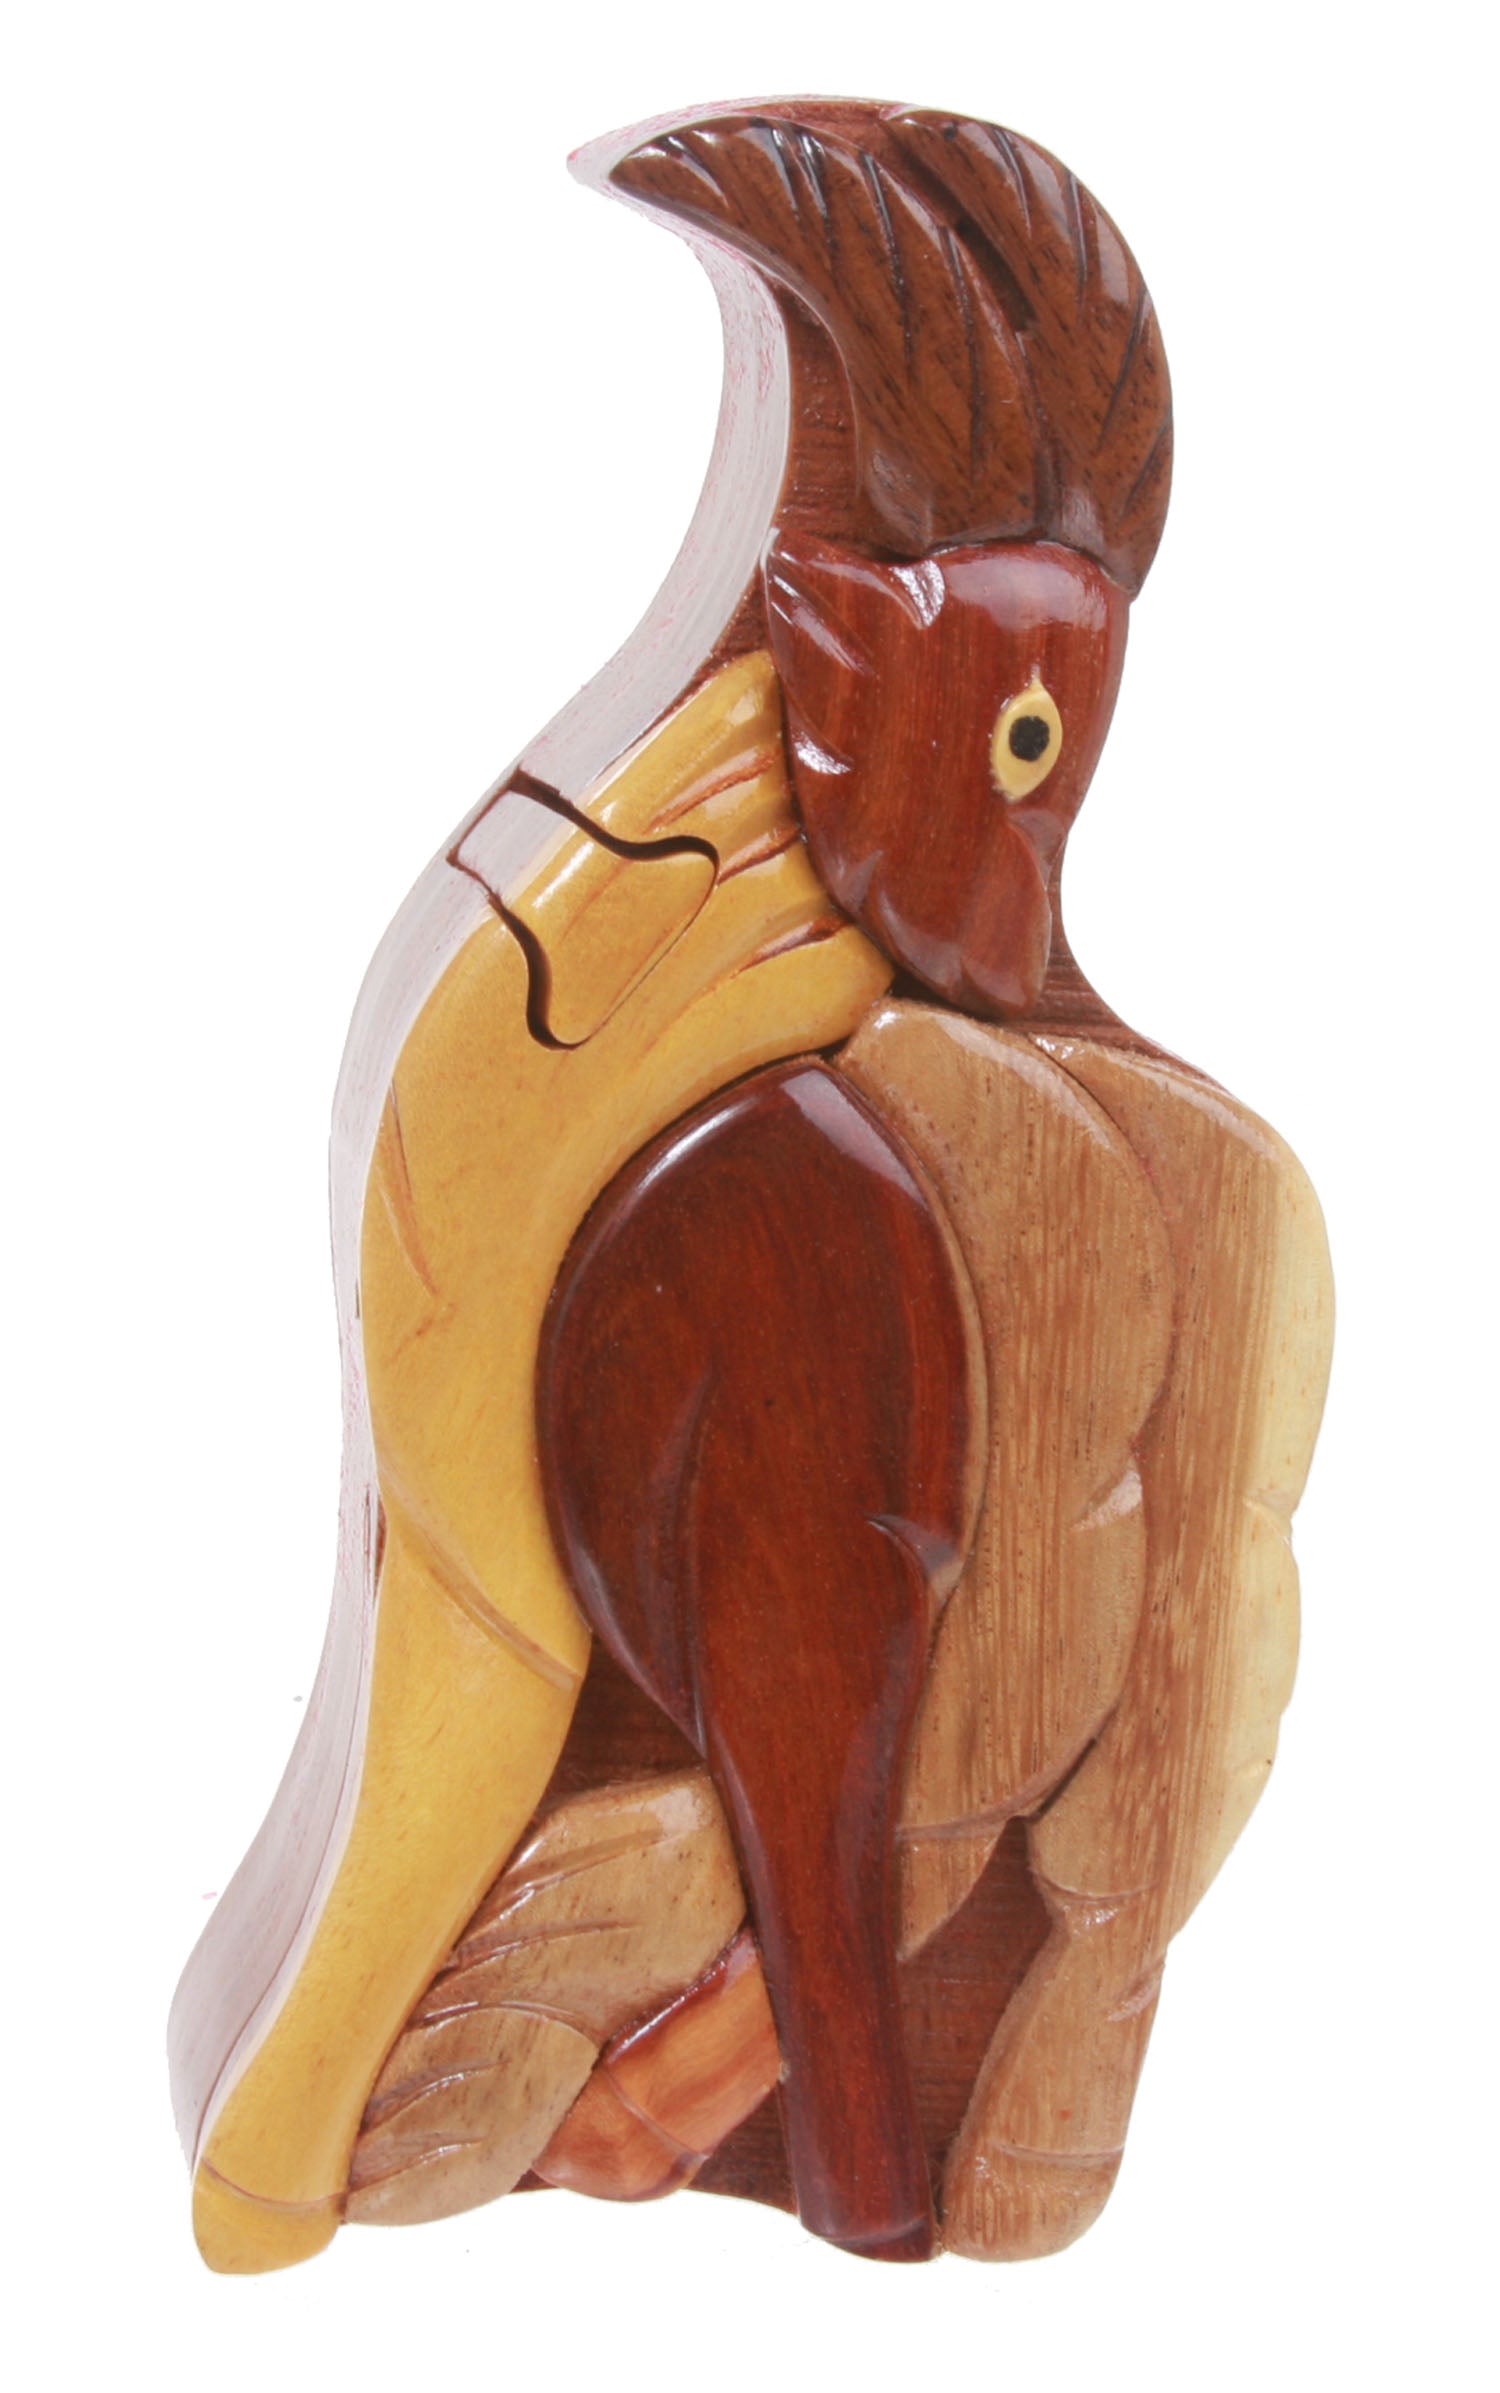 Handcrafted Wooden Goat Shape Secret Jewelry Puzzle Box - Goat